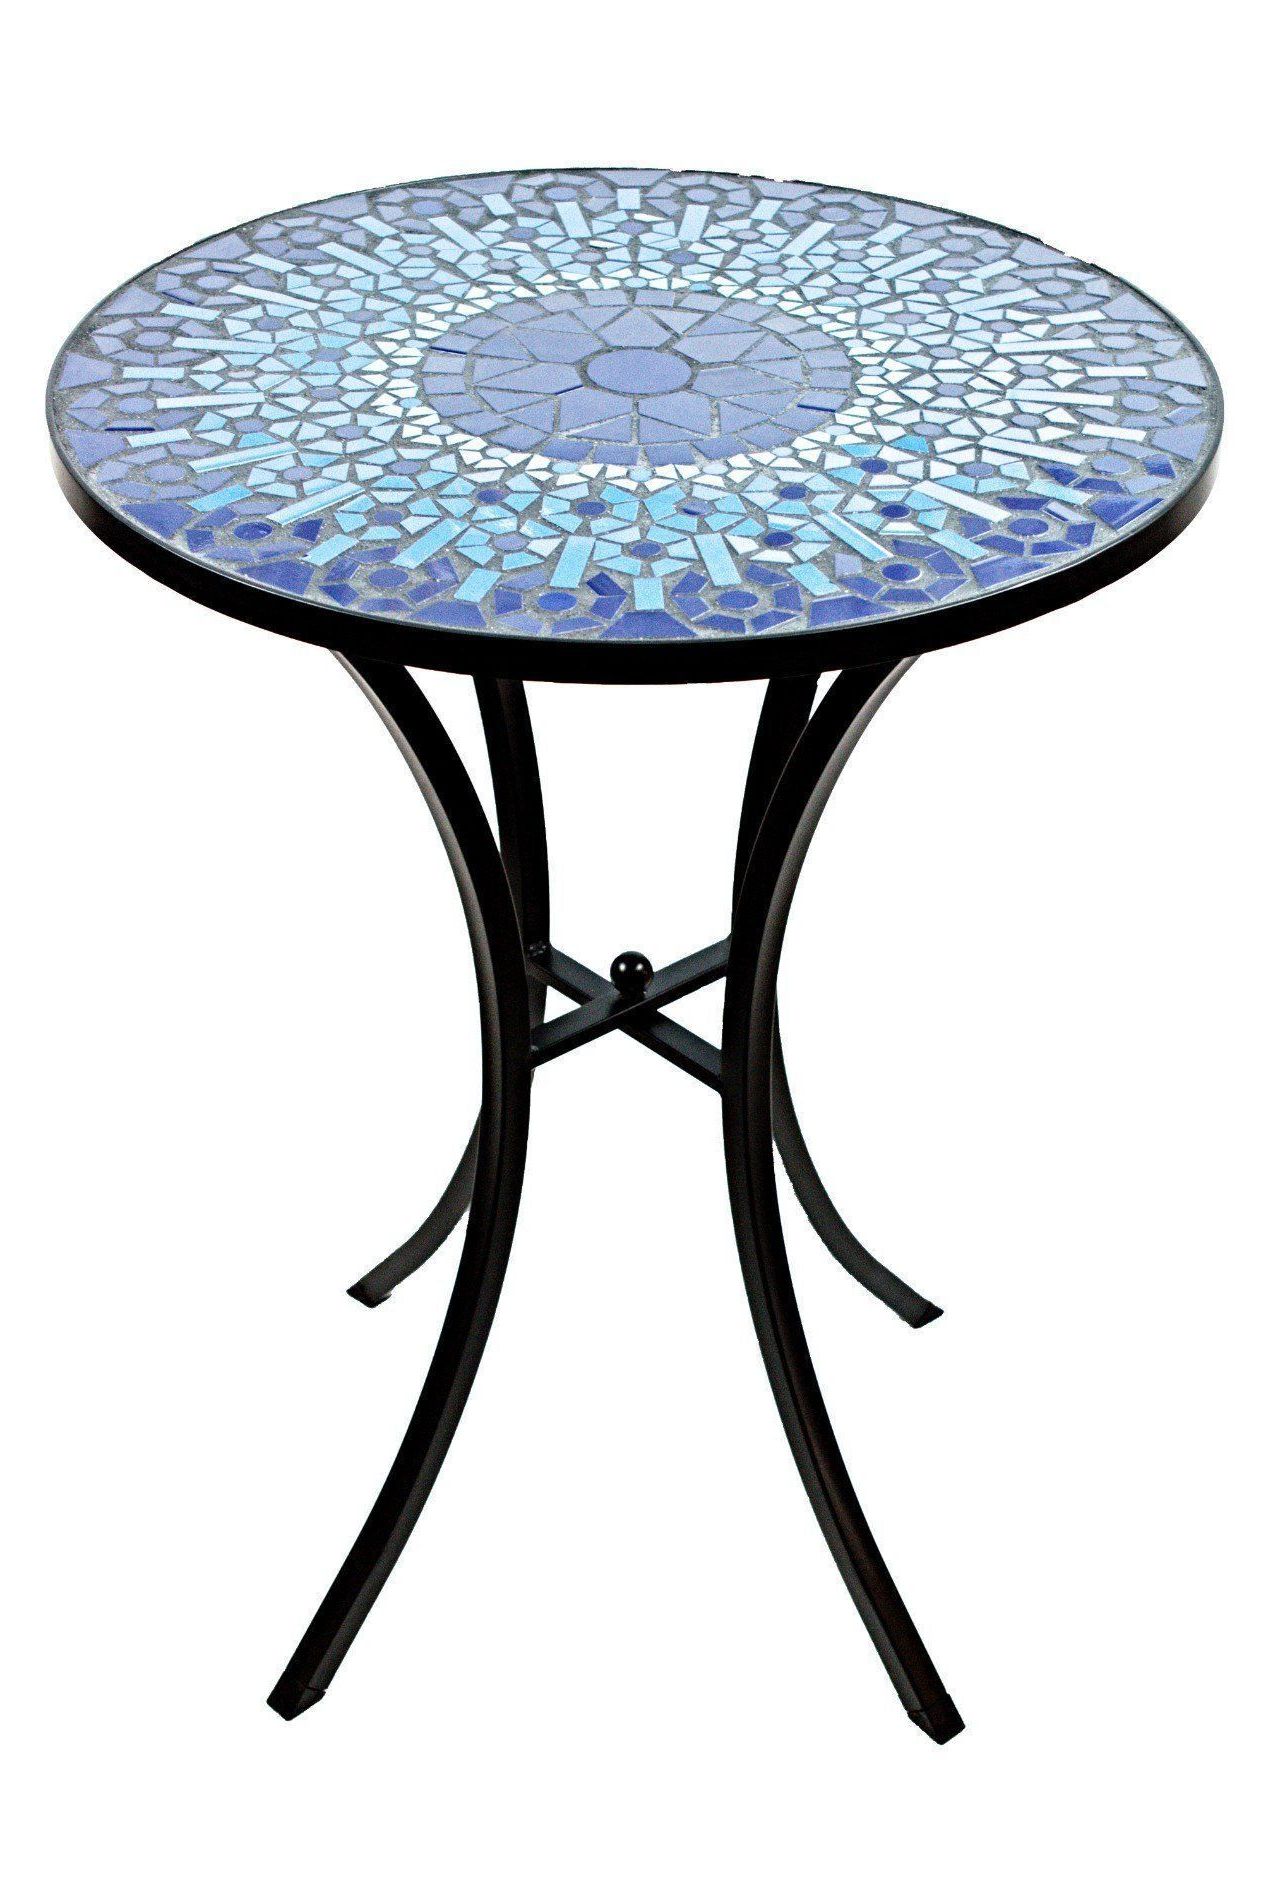 Mosaic Accent Table, Mosaic Furniture, Mosaic Table (View 1 of 15)